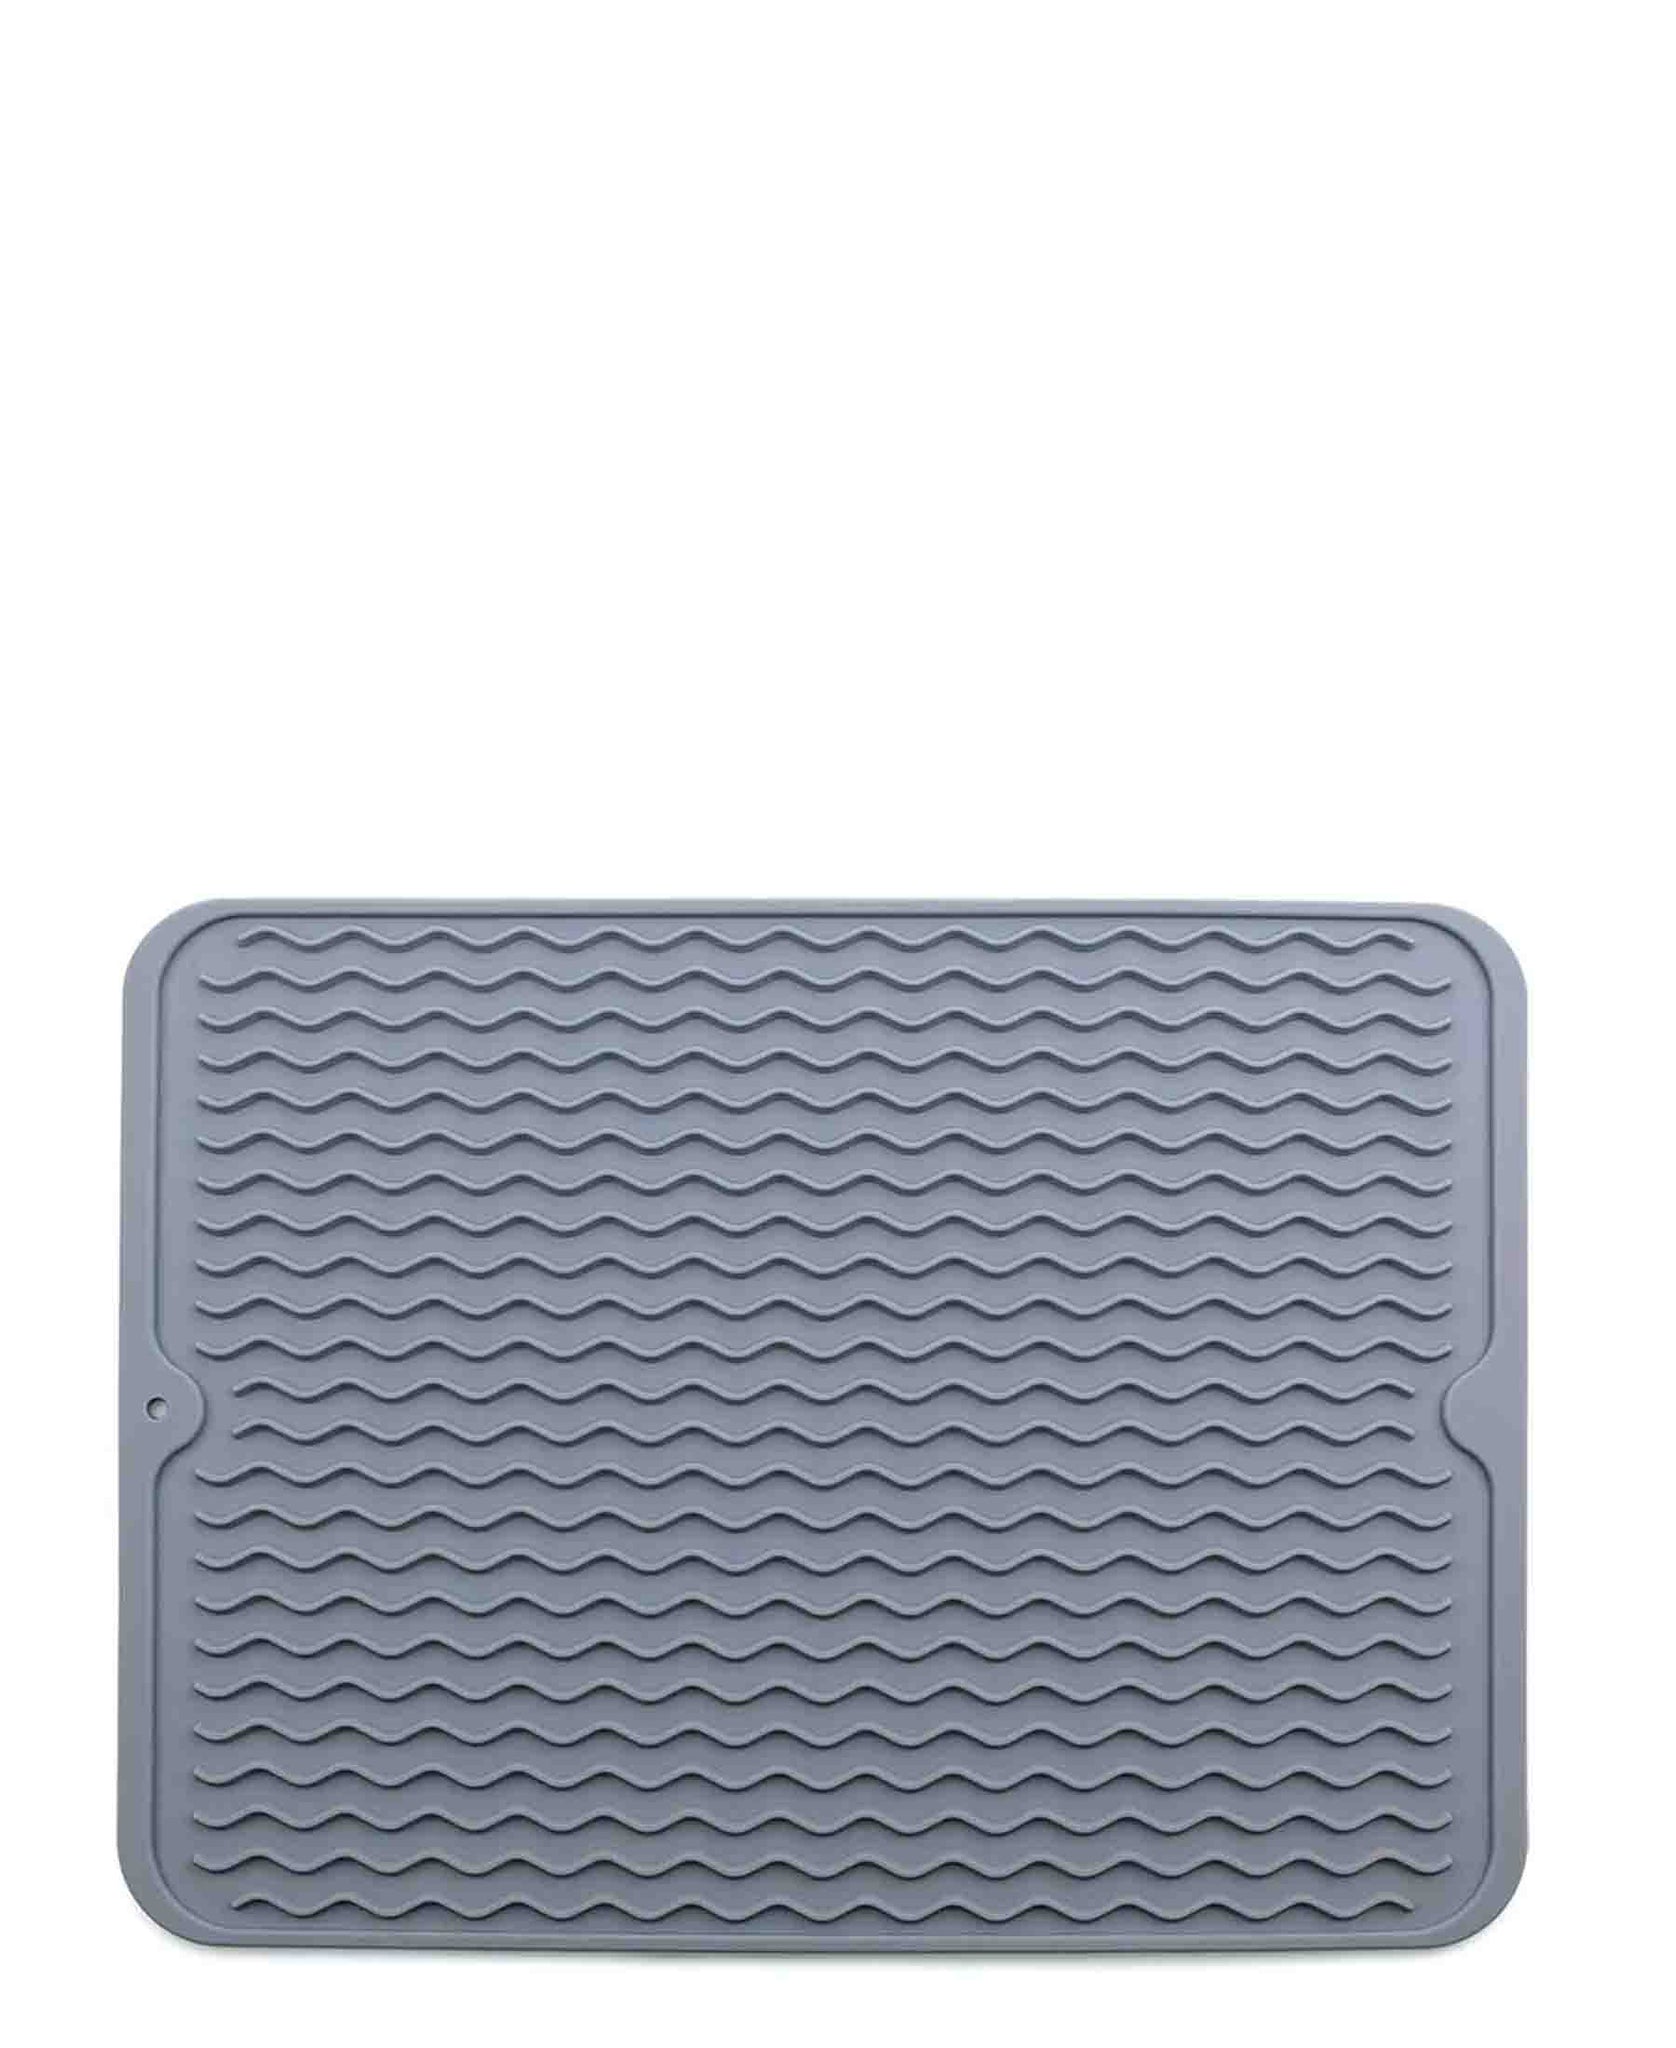 Home Classix Silicone Heat Resistant Mats - Grey